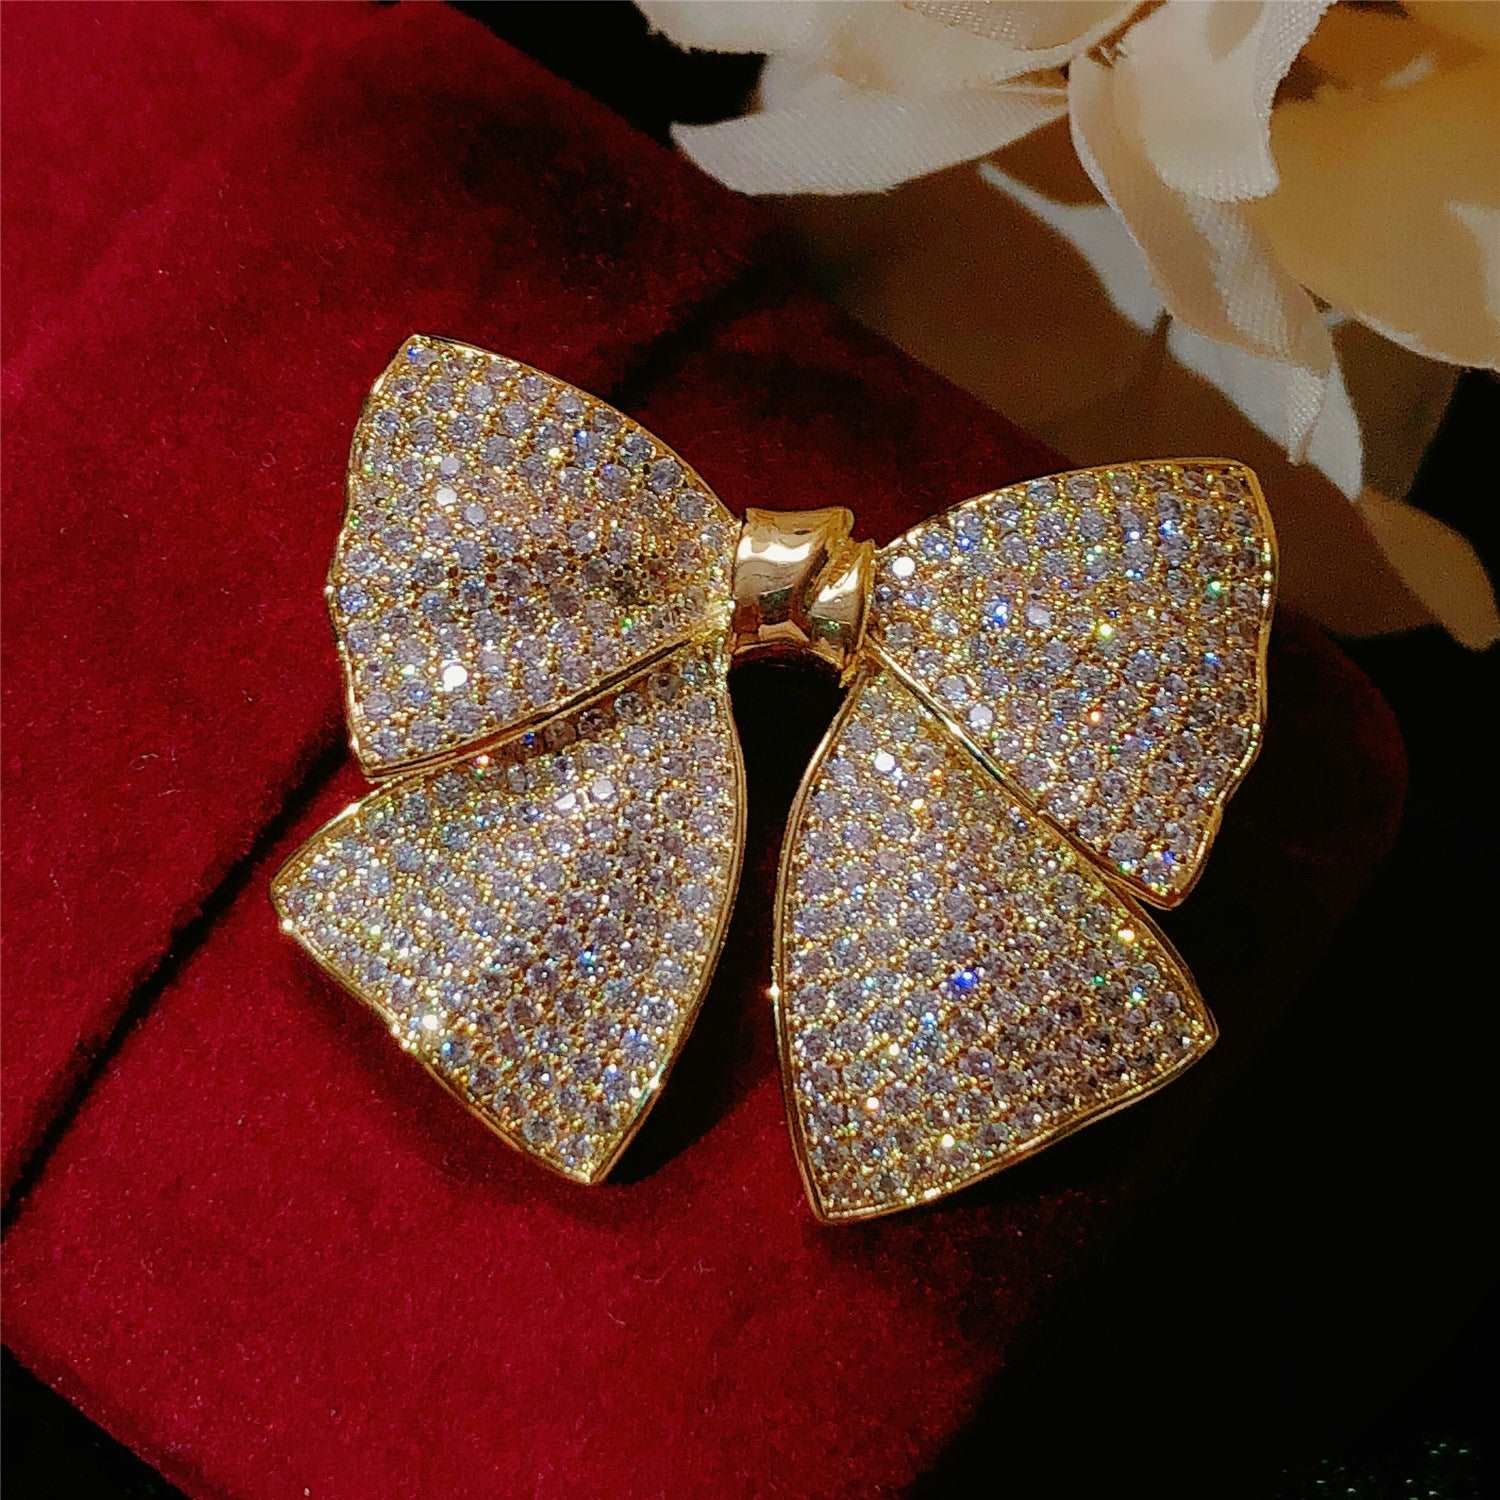 Feminine White Cubic Zirconia Gold Bow Brooch Pin for Dresses, Coat or Scarf